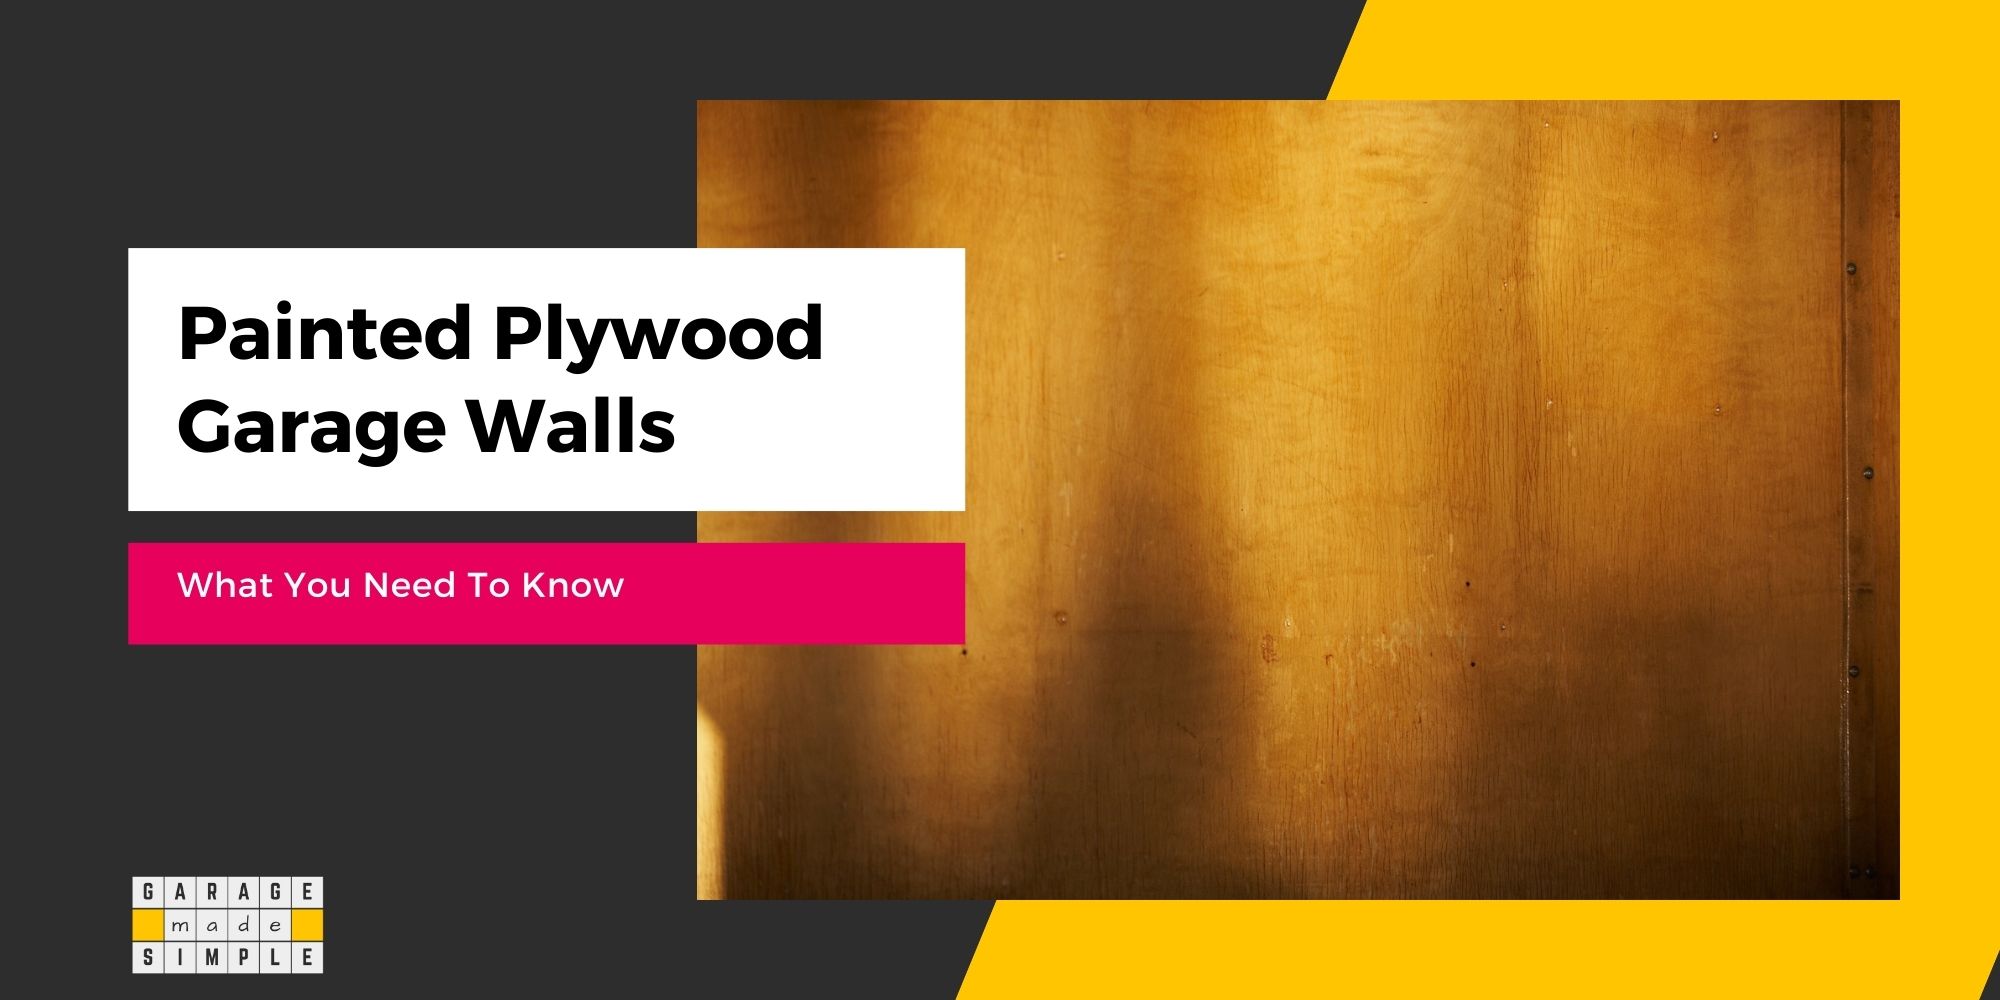 Can You Paint Plywood Garage Walls? (Important Stuff You Need To Know!)